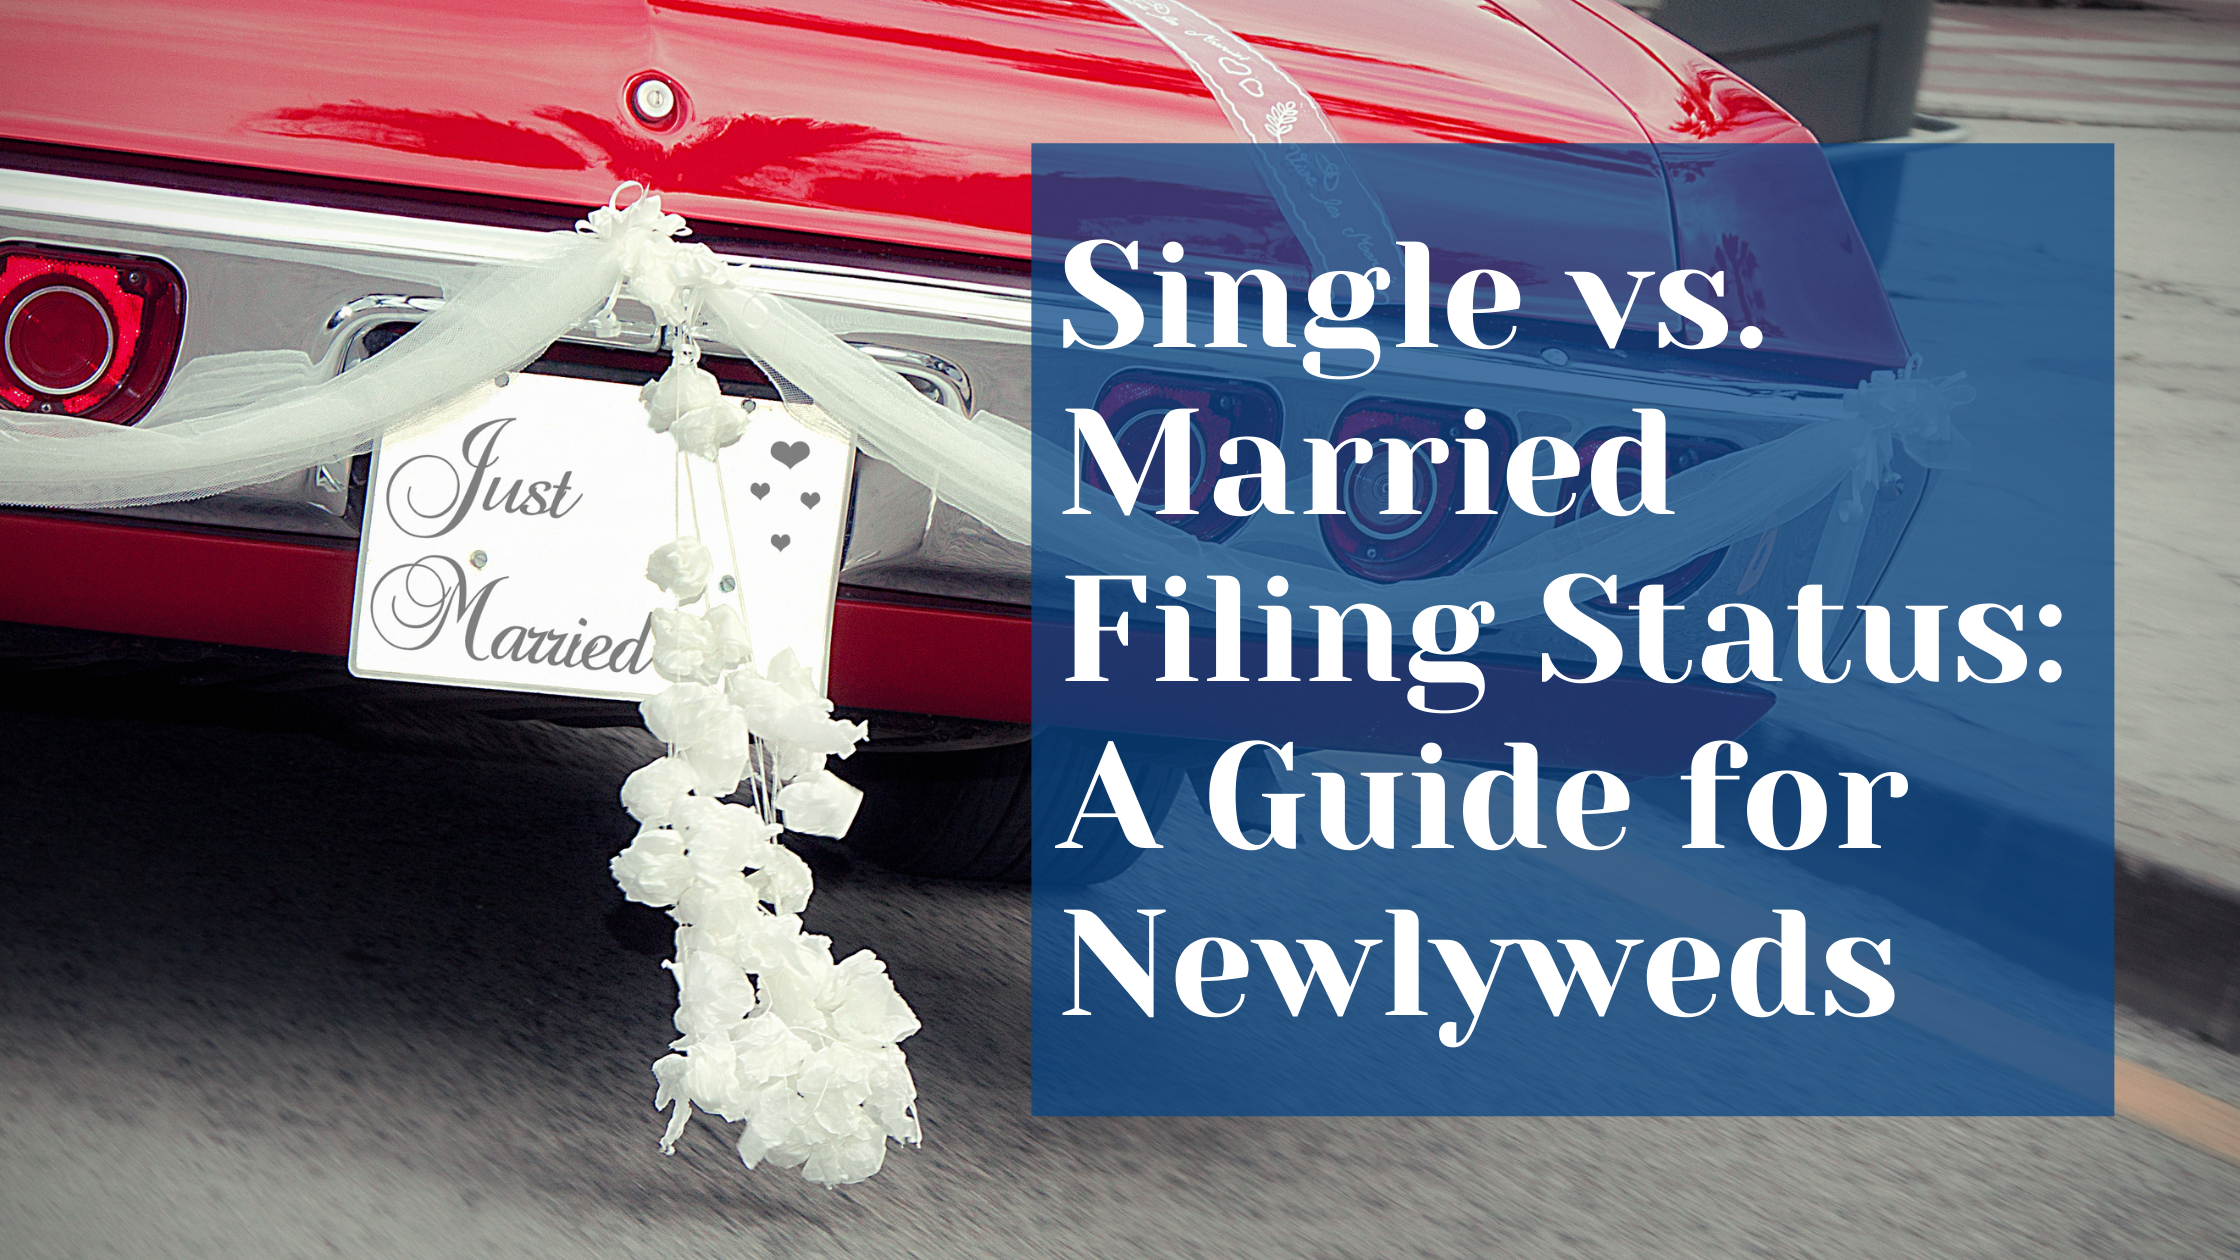 Single vs. Married Filing Status: A Guide for Newlyweds